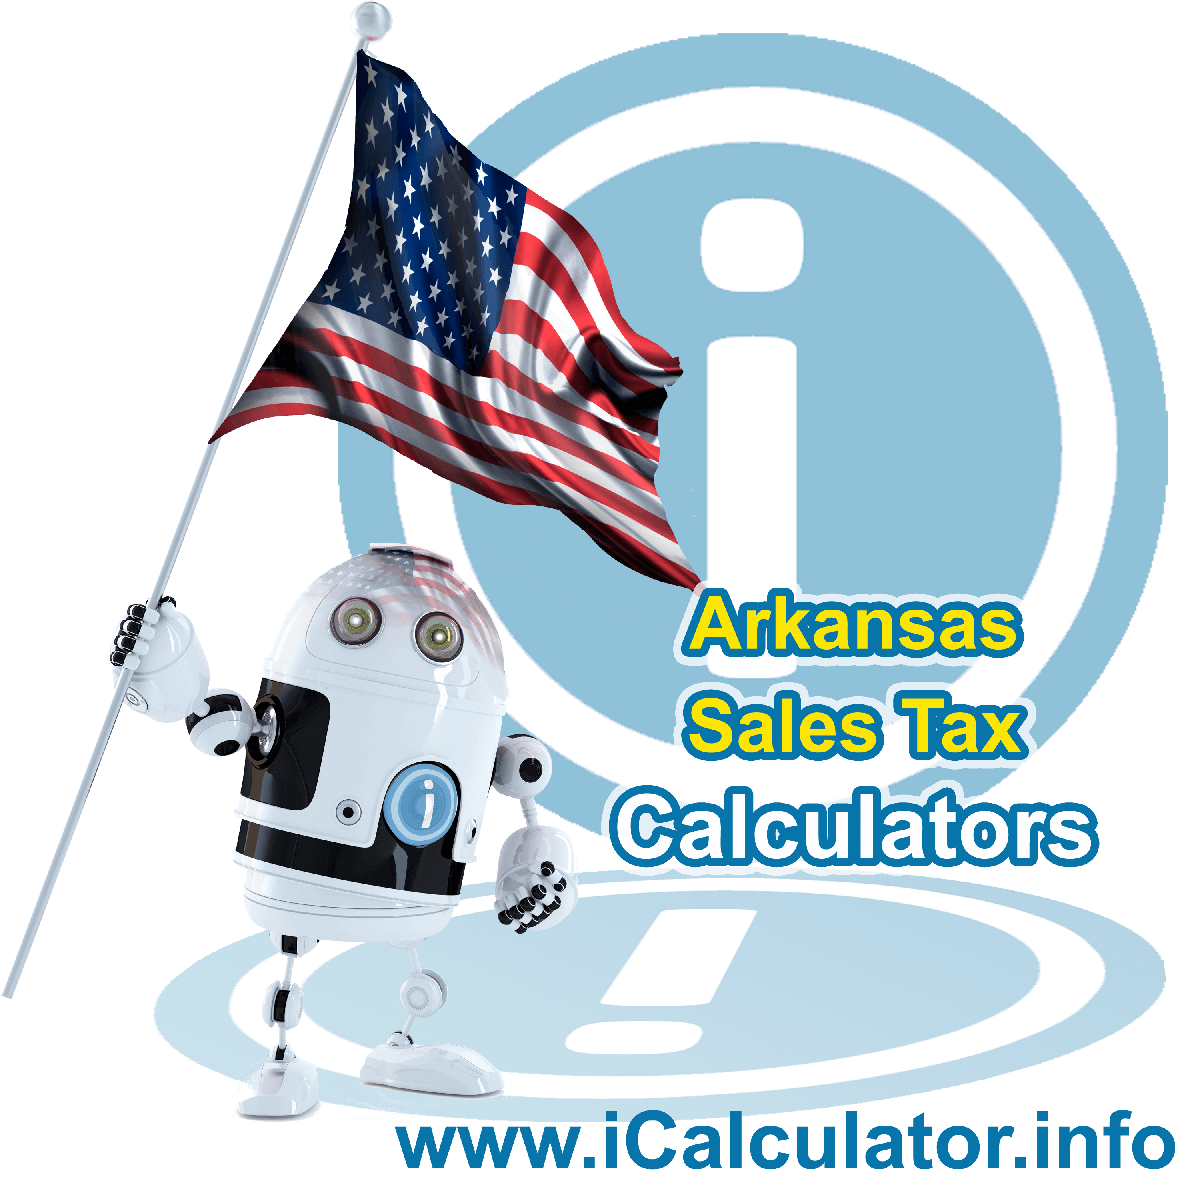 Monticello Sales Rates: This image illustrates a calculator robot calculating Monticello sales tax manually using the Monticello Sales Tax Formula. You can use this information to calculate Monticello Sales Tax manually or use the Monticello Sales Tax Calculator to calculate sales tax online.